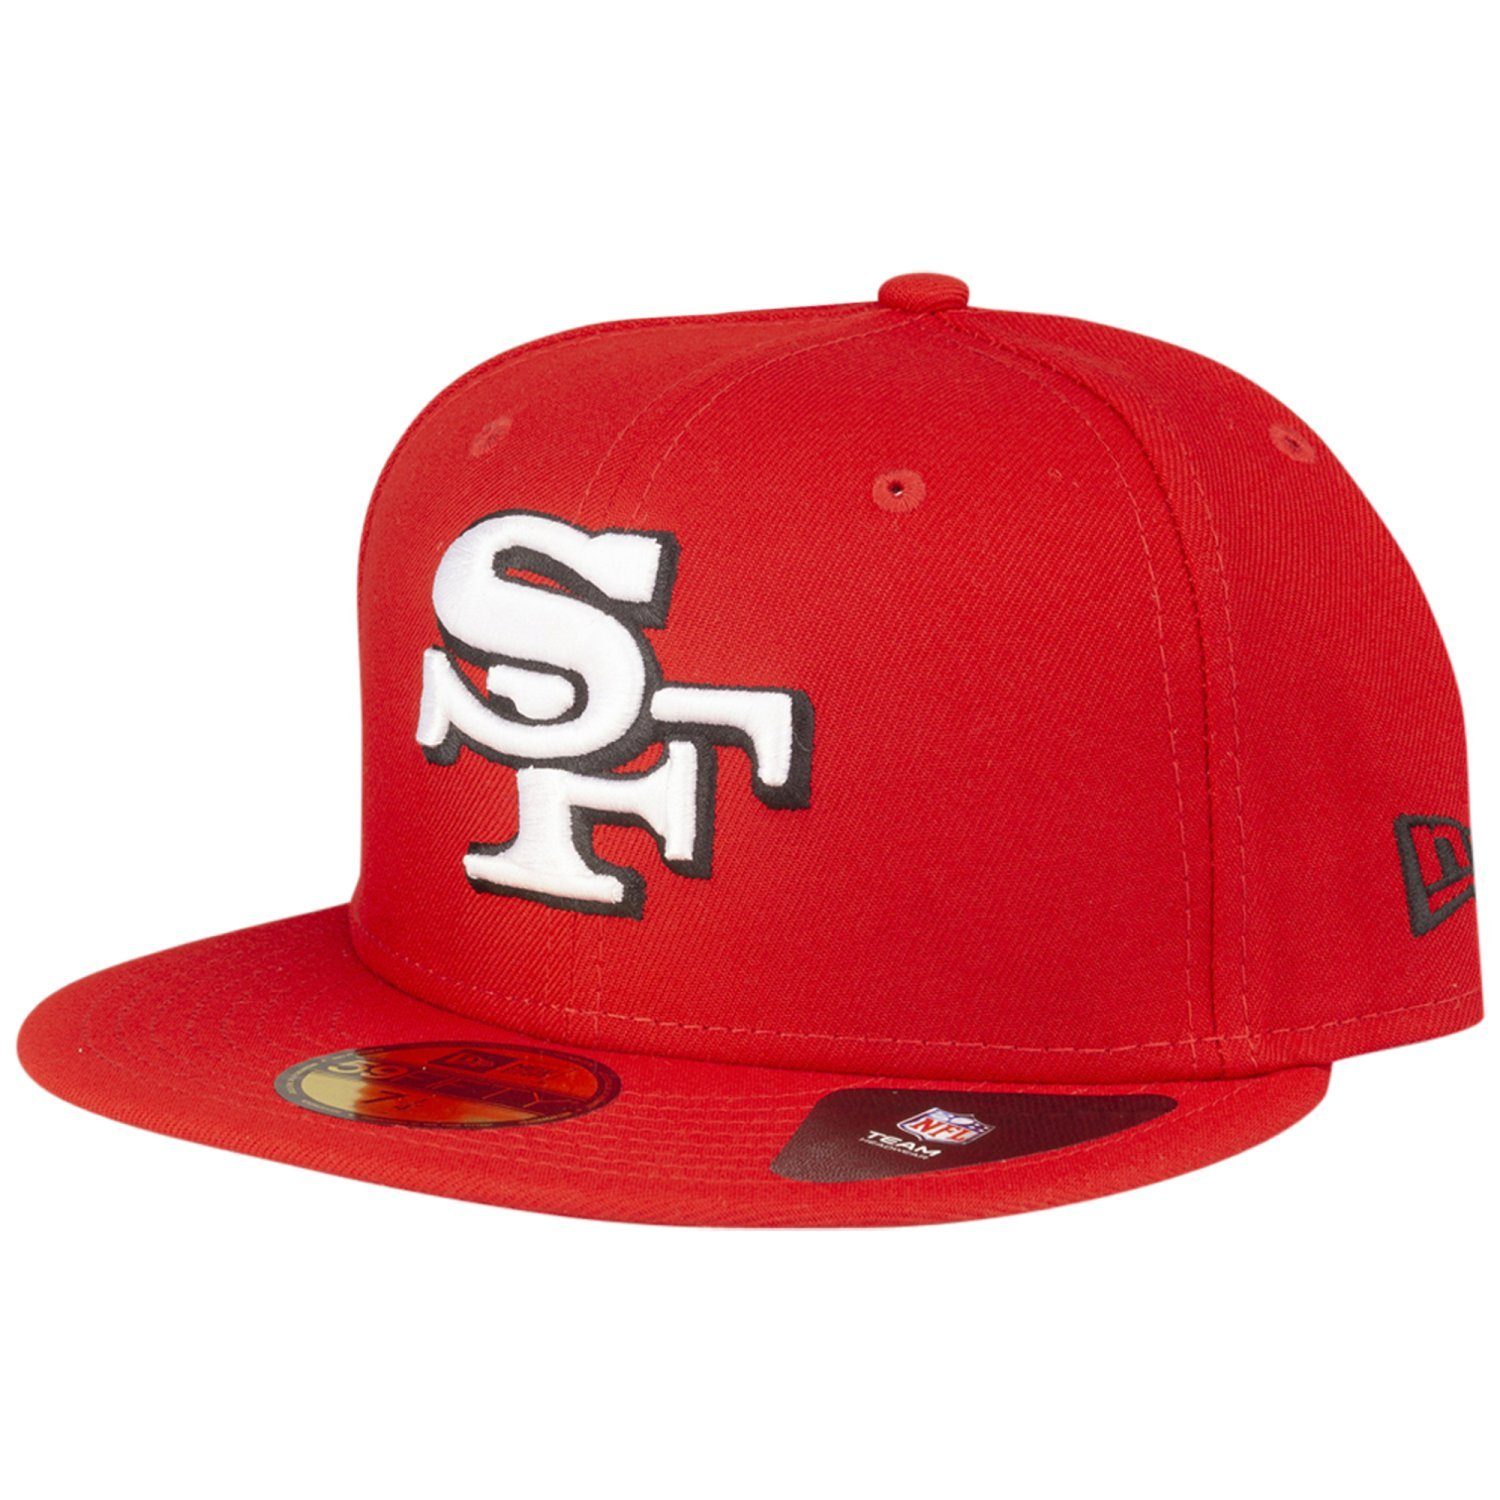 Fitted Francisco Era San New ELEMENTAL 49ers 59Fifty Cap